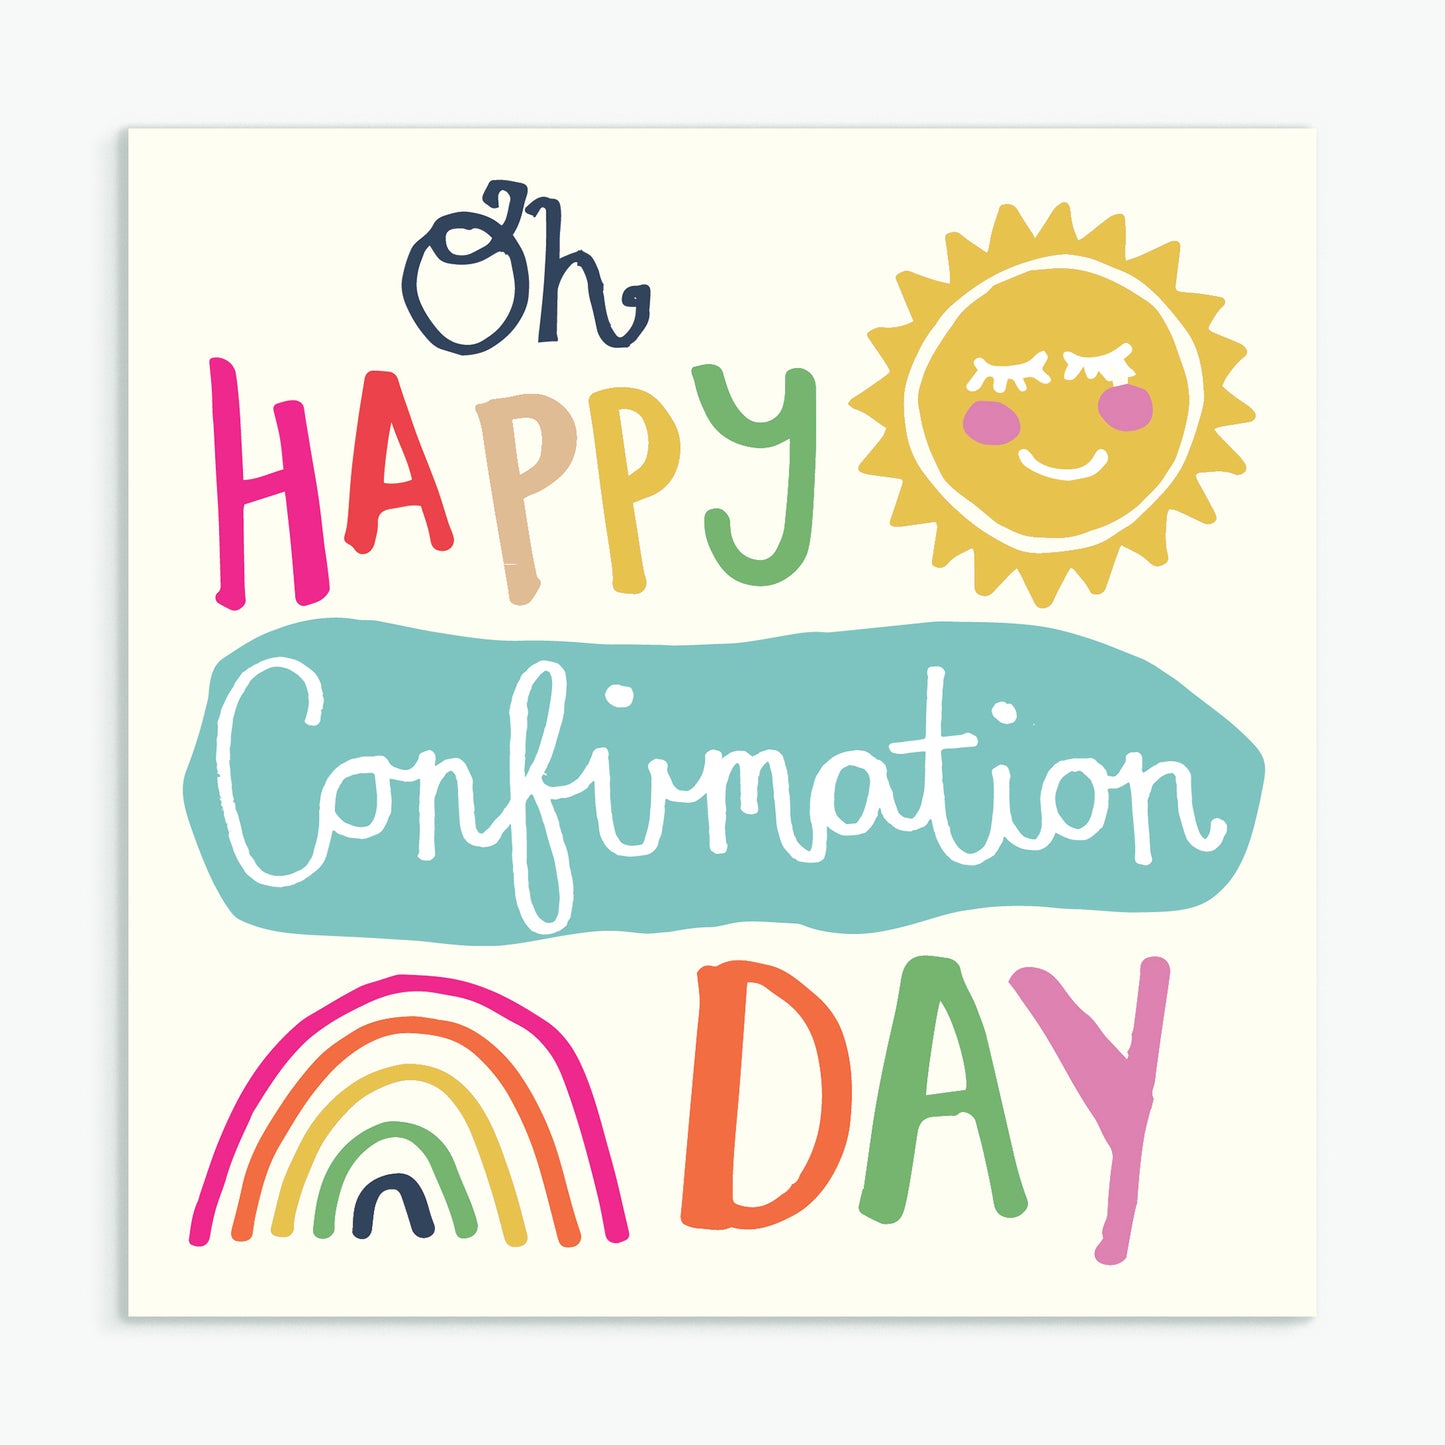 'Oh Happy Confirmation Day' Greeting Card & Envelope